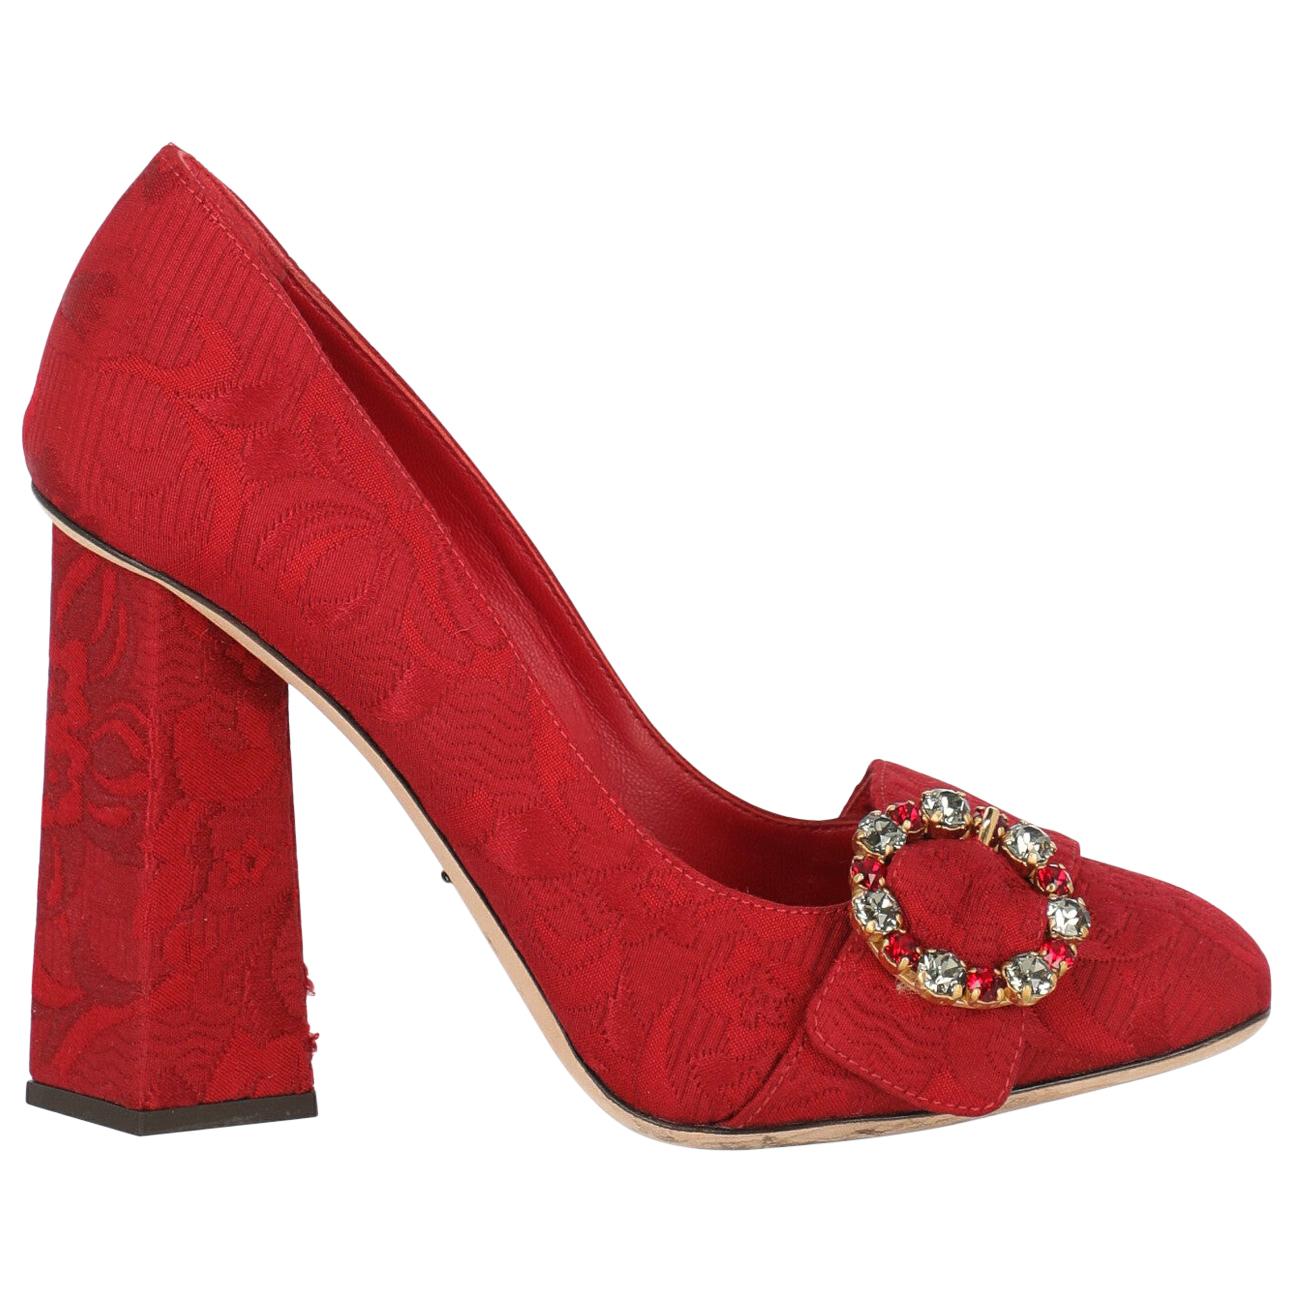 Dolce & Gabbana Woman Pumps Red Fabric IT 39 For Sale